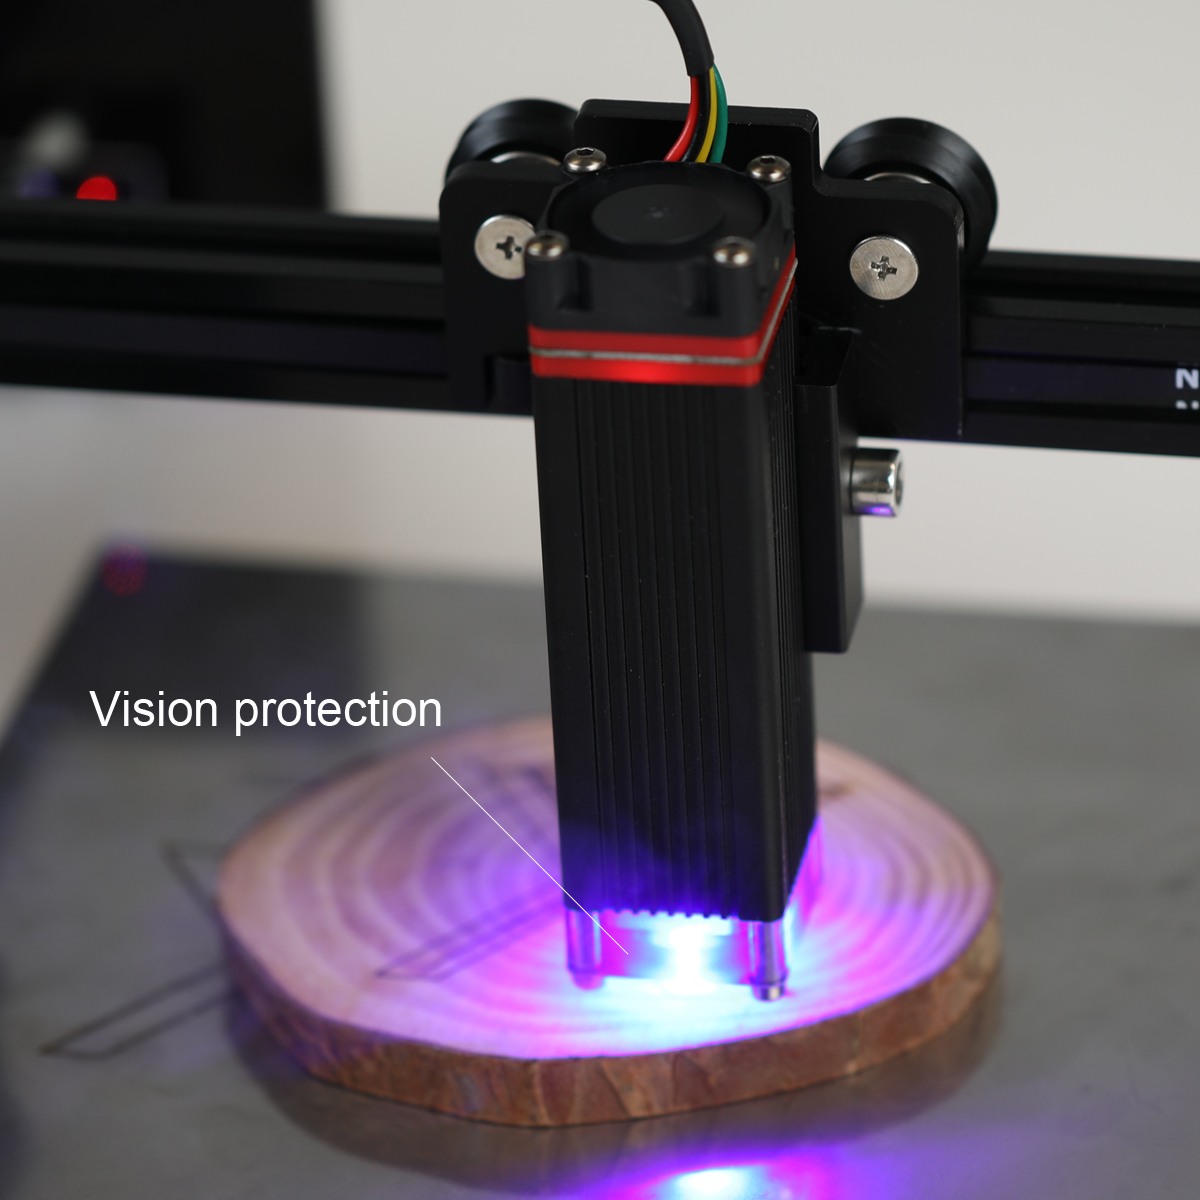 NEJE-30W-Laser-Cutting-Module-Fixed-Focusable-Lens-Vision-Protection-Modified-Laser-Air-Assist-For-L-1758629-3